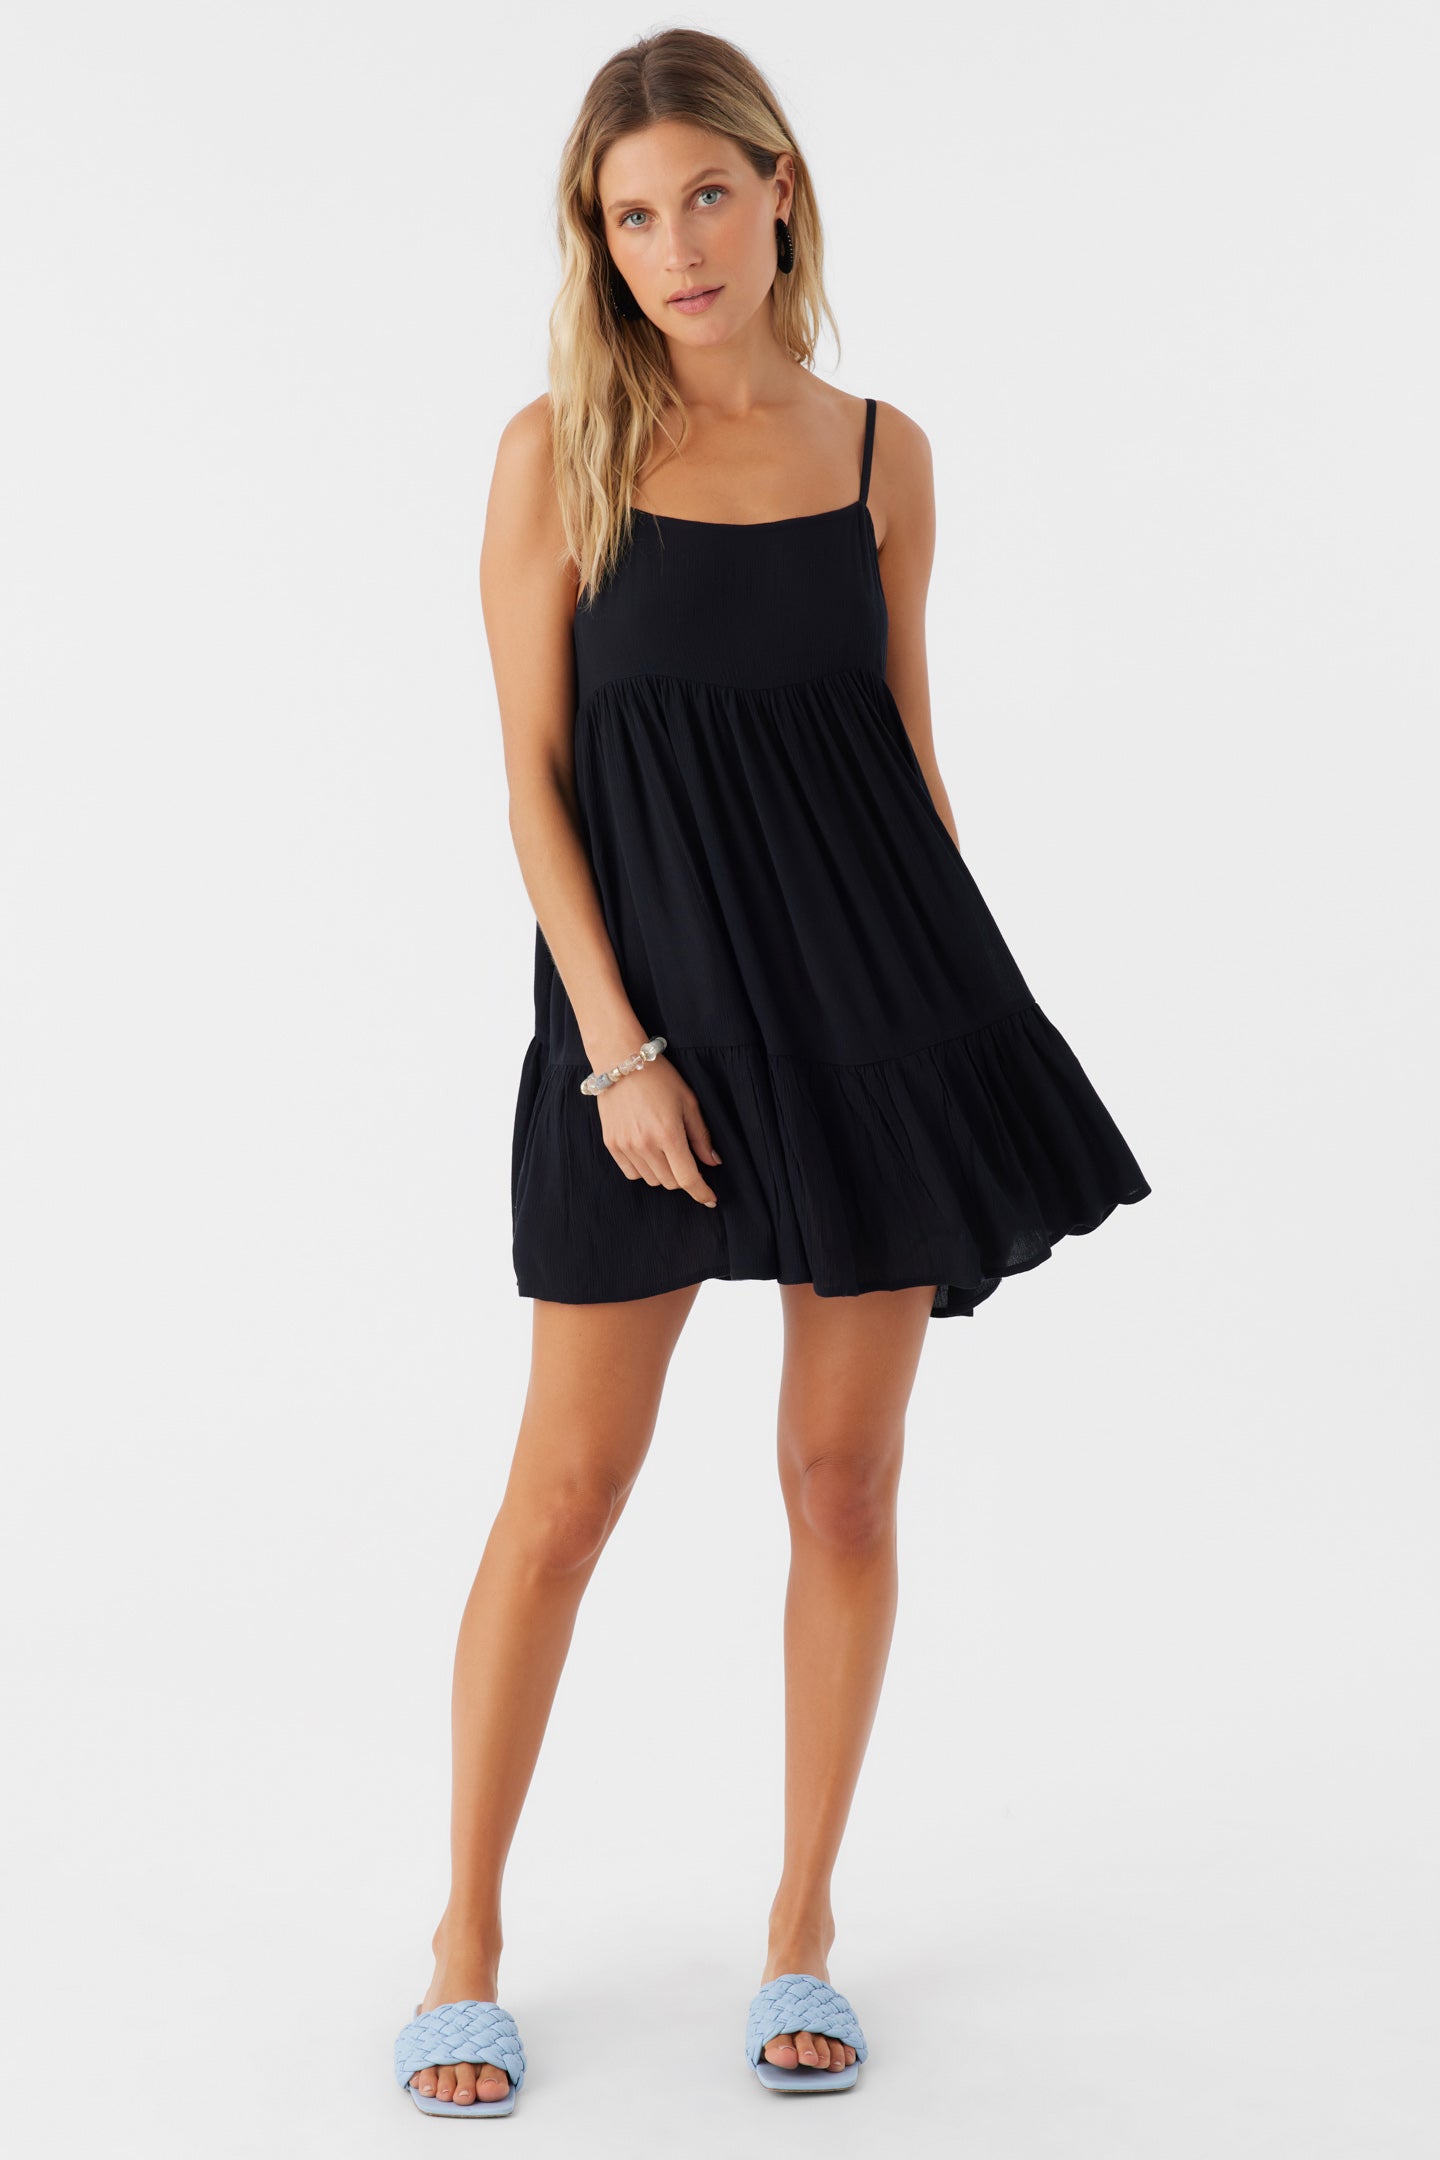 Saltwater Solids Rilee Cover-Up Dress - Black | O'Neill